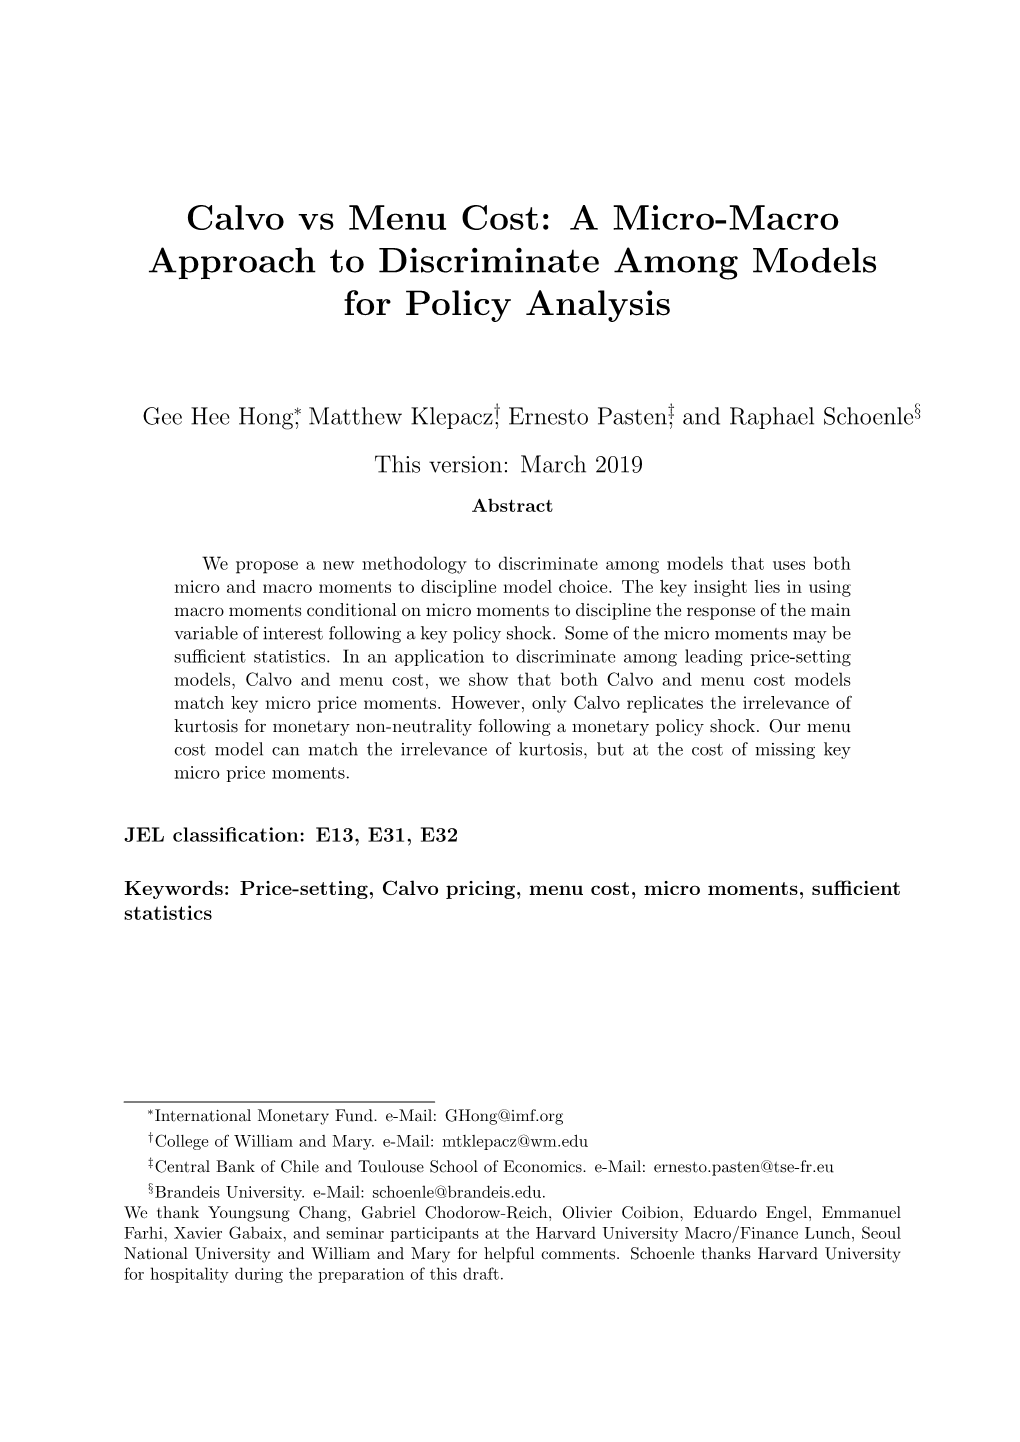 Calvo Vs Menu Cost: a Micro-Macro Approach to Discriminate Among Models for Policy Analysis